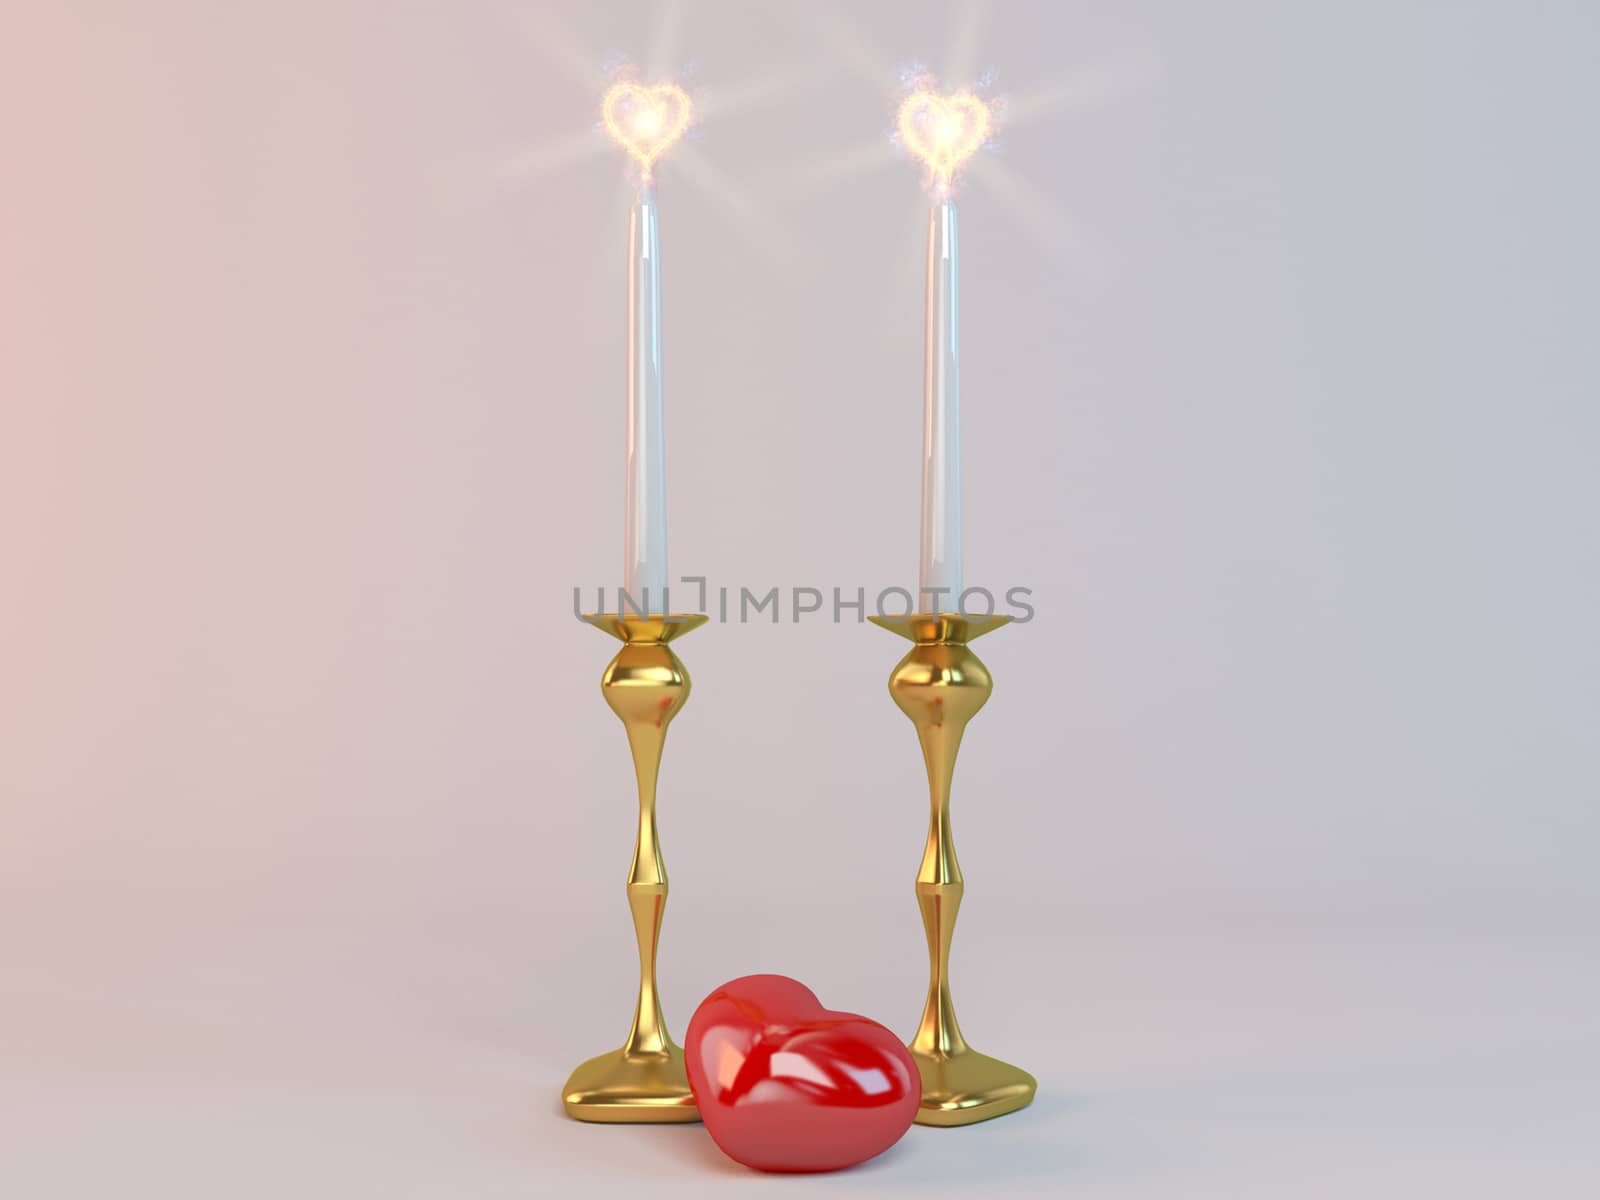 Candles and hearts for lovers and valentine day